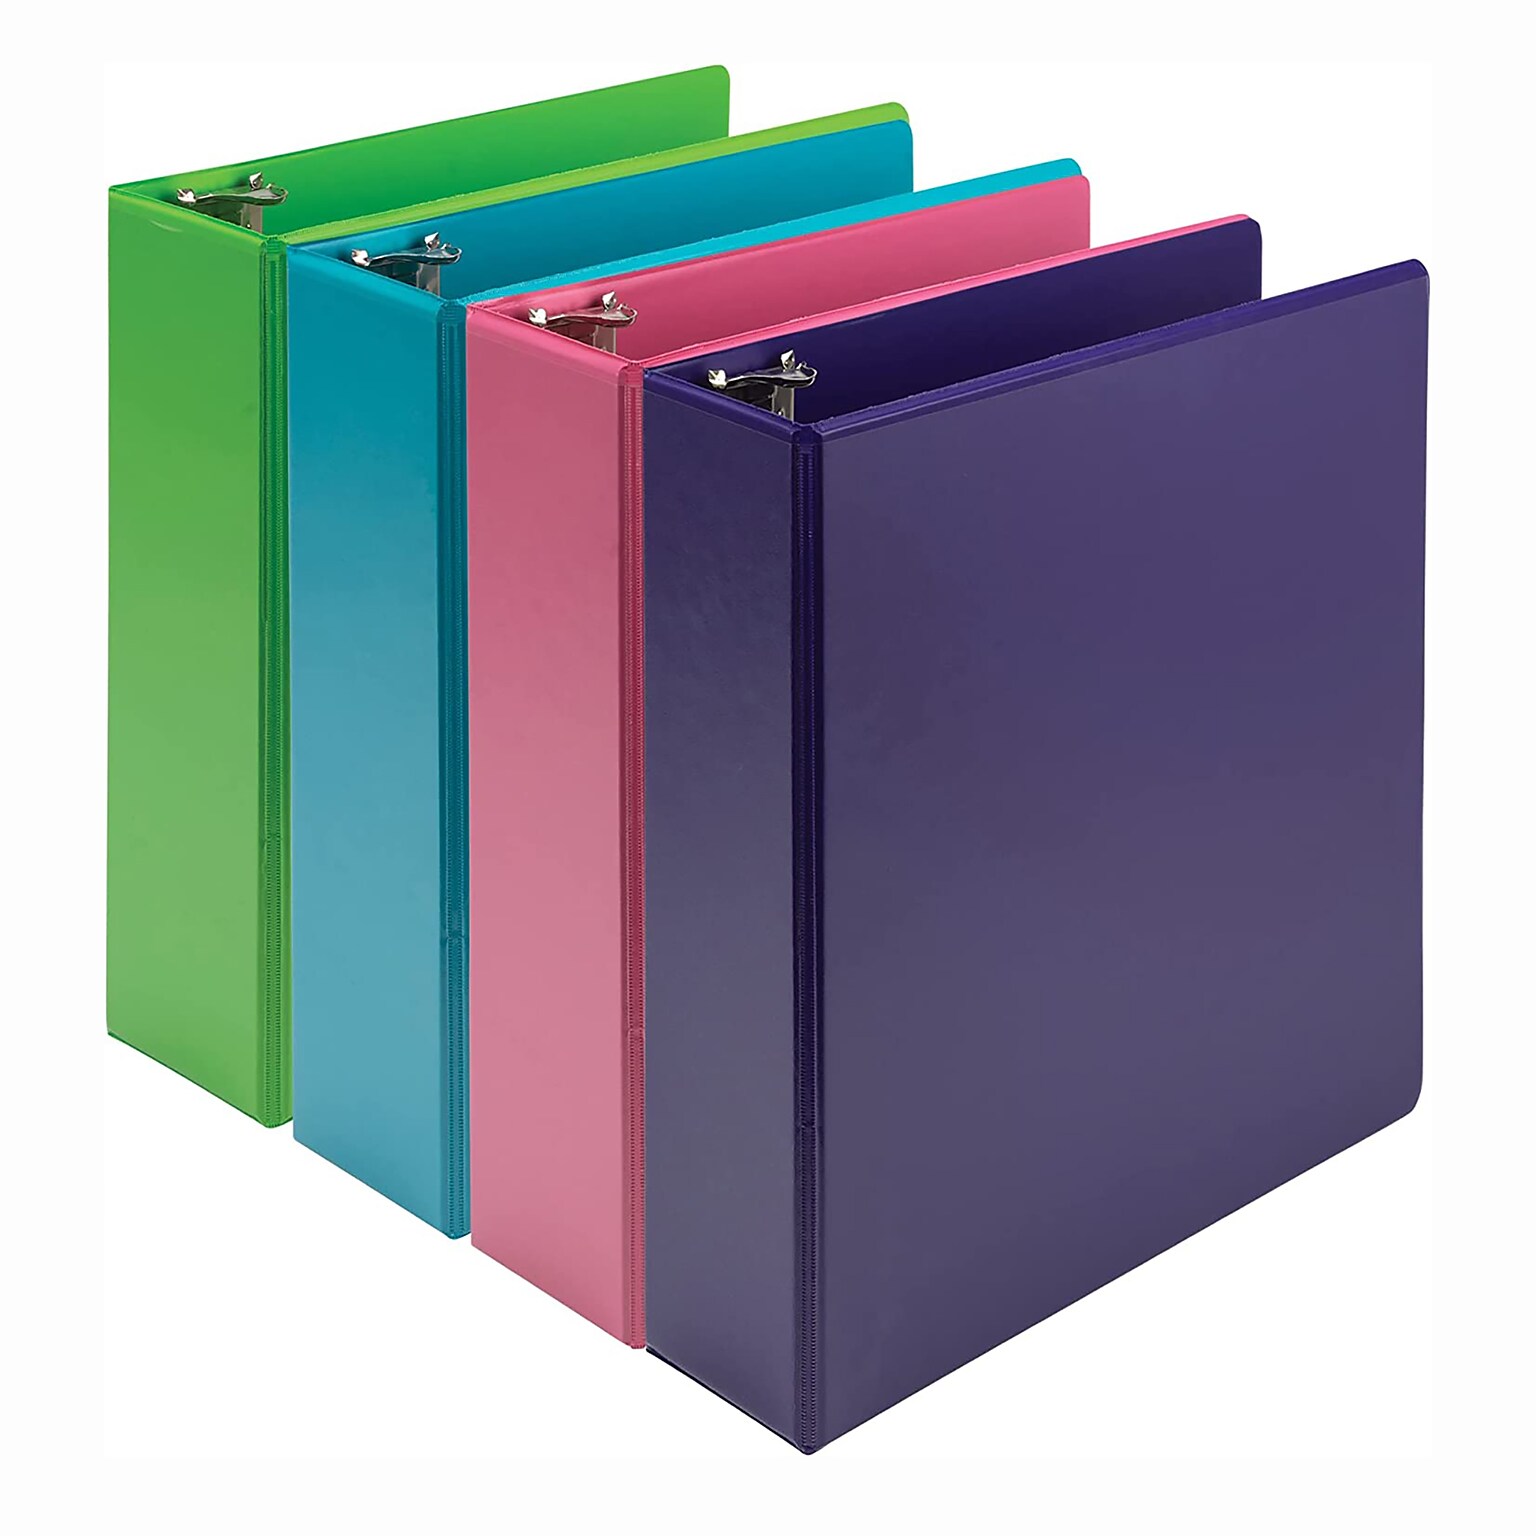 Samsill Earths Choice Plant-Based 3 3 Ring View Binders, Assorted Tropical Colors, 4/Pack (MP48689)